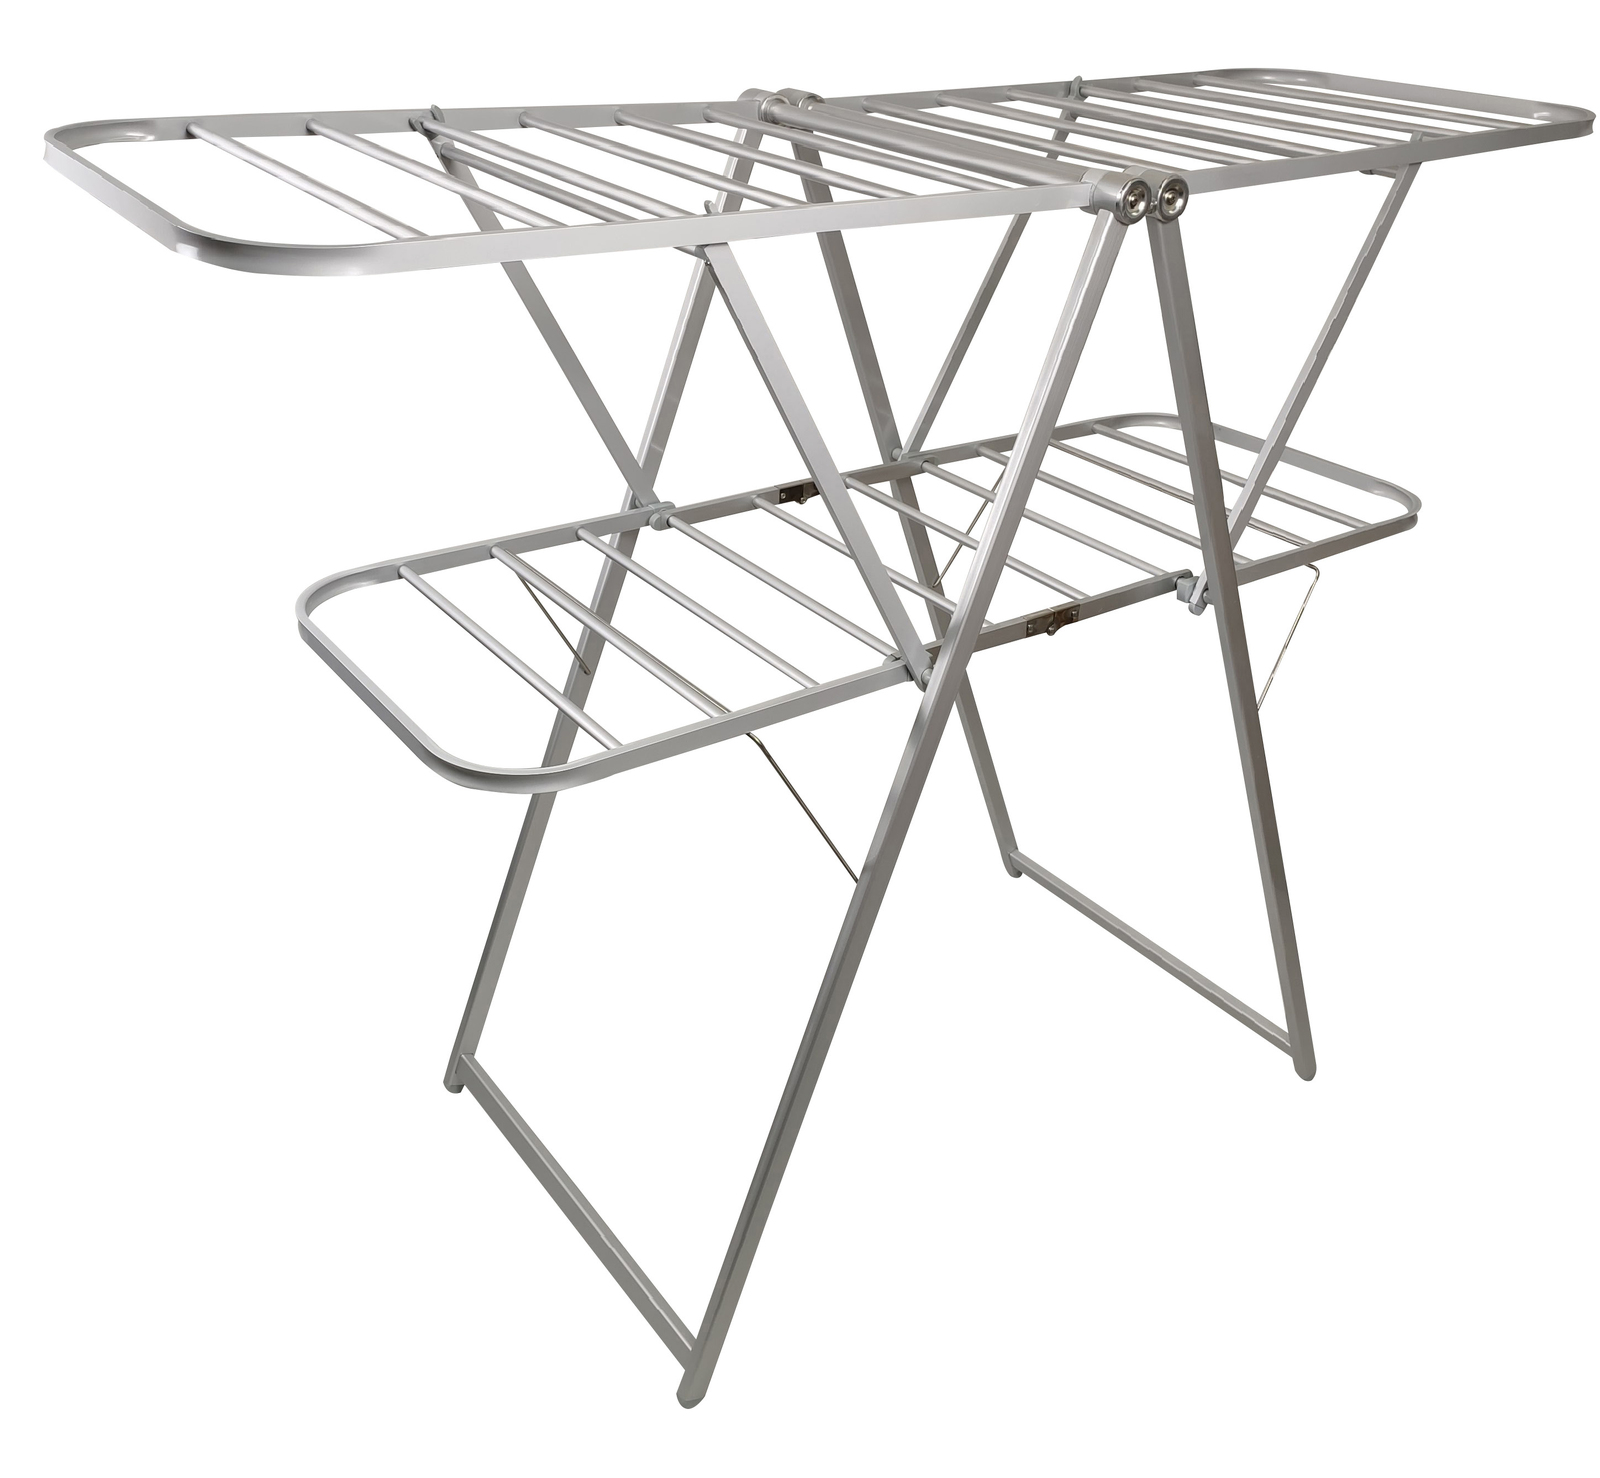 Buy Our All Aluminum 2 Tier Clothes Airer A Frame